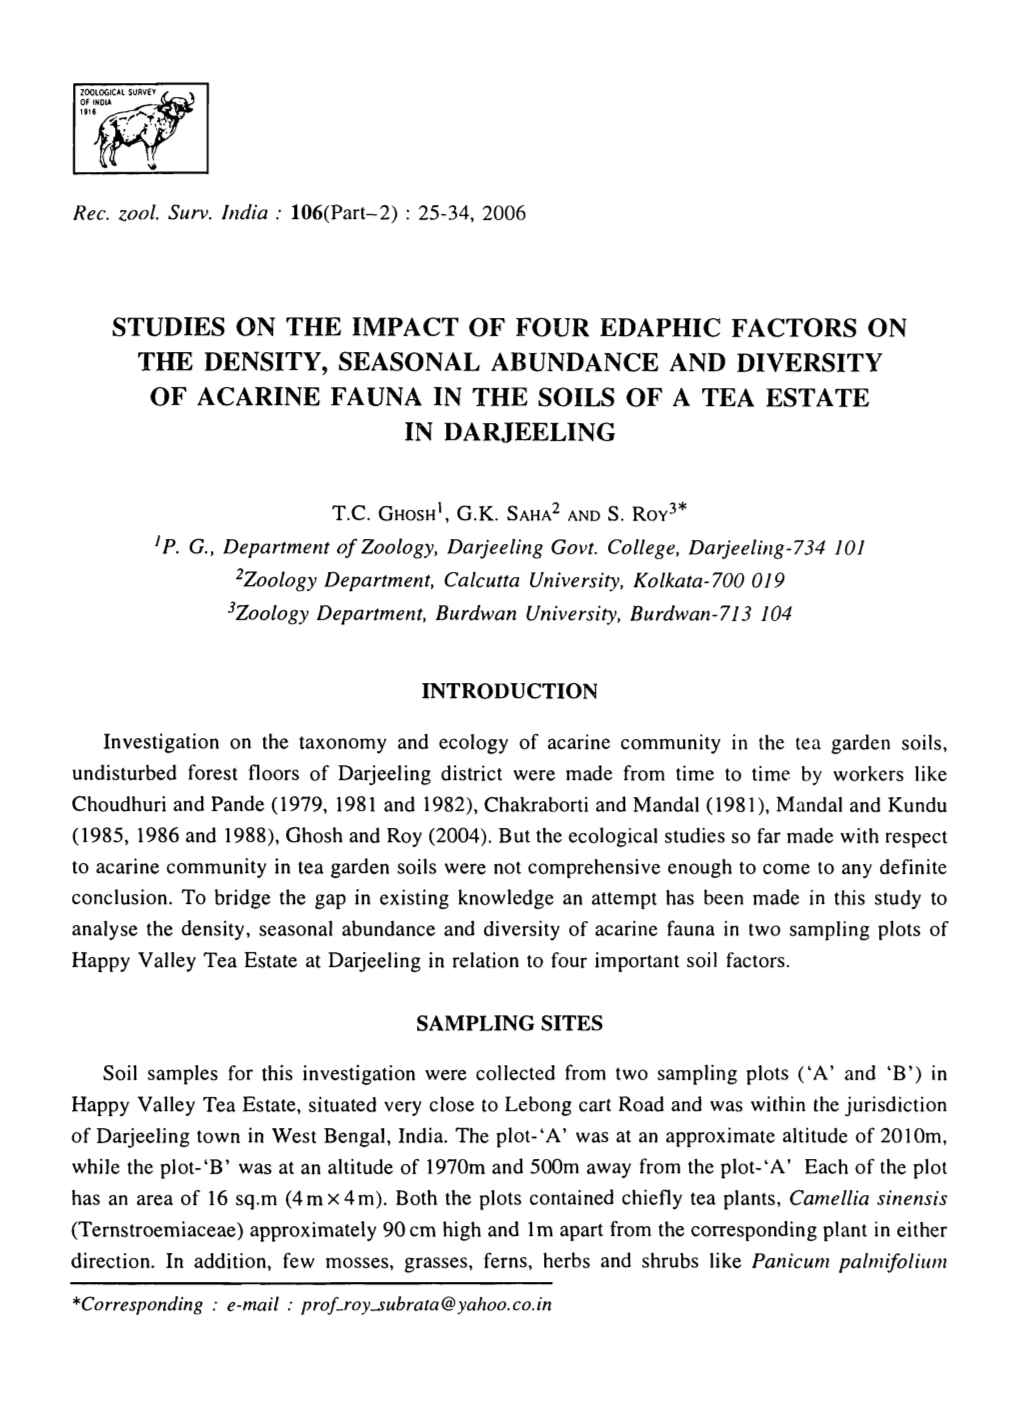 Studies on the Impact of Four Edaphic Factors on the Density, Seasonal Abundance and Diversity of Acarine Fauna in the Soils of a Tea Estate in Darjeeling